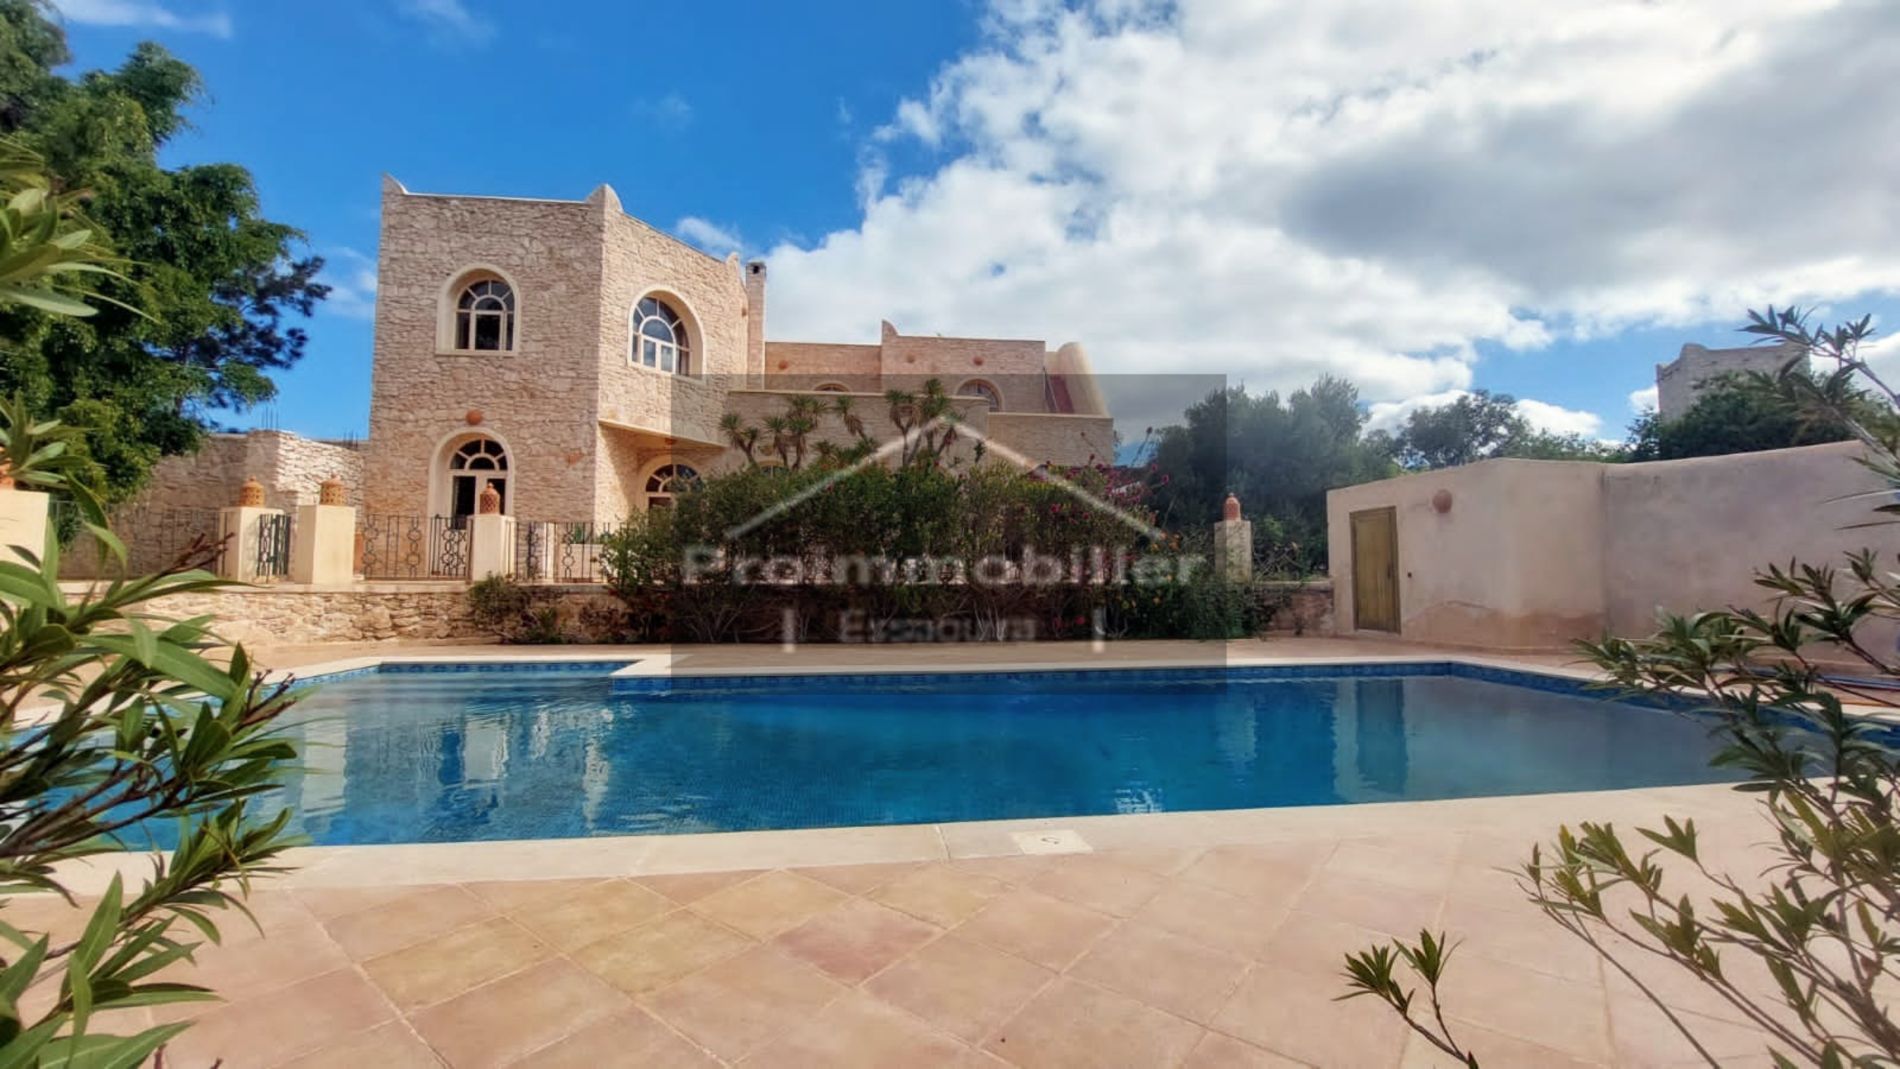 23-02-07-VM Beautiful Beldi House in countryside of 325 m² for sale in Essaouira Land of 10166 m²